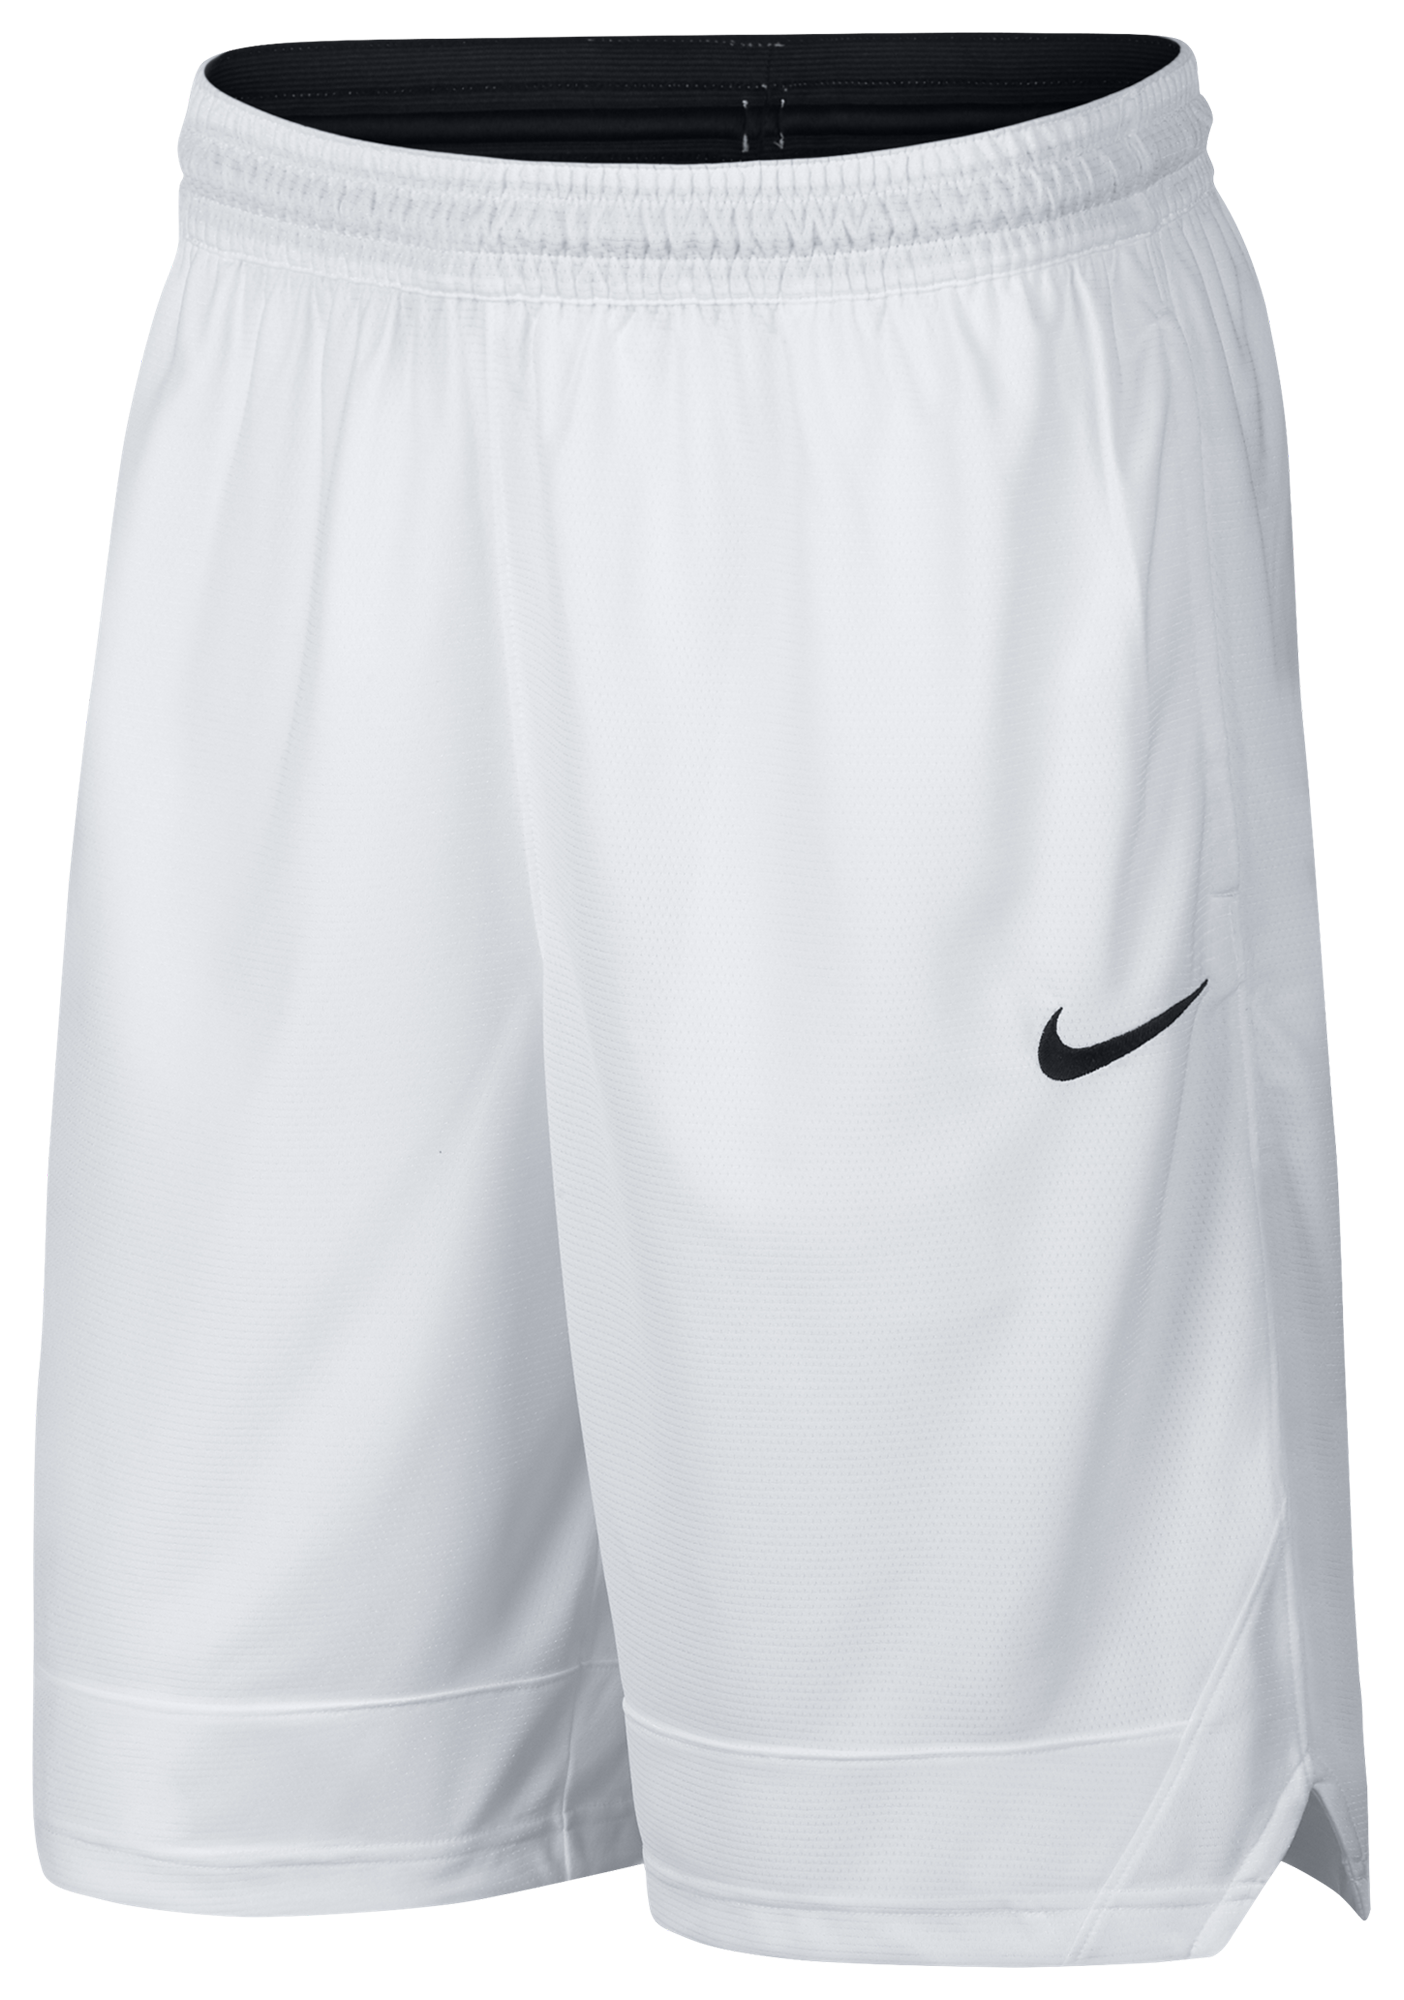 nike shorts red and white